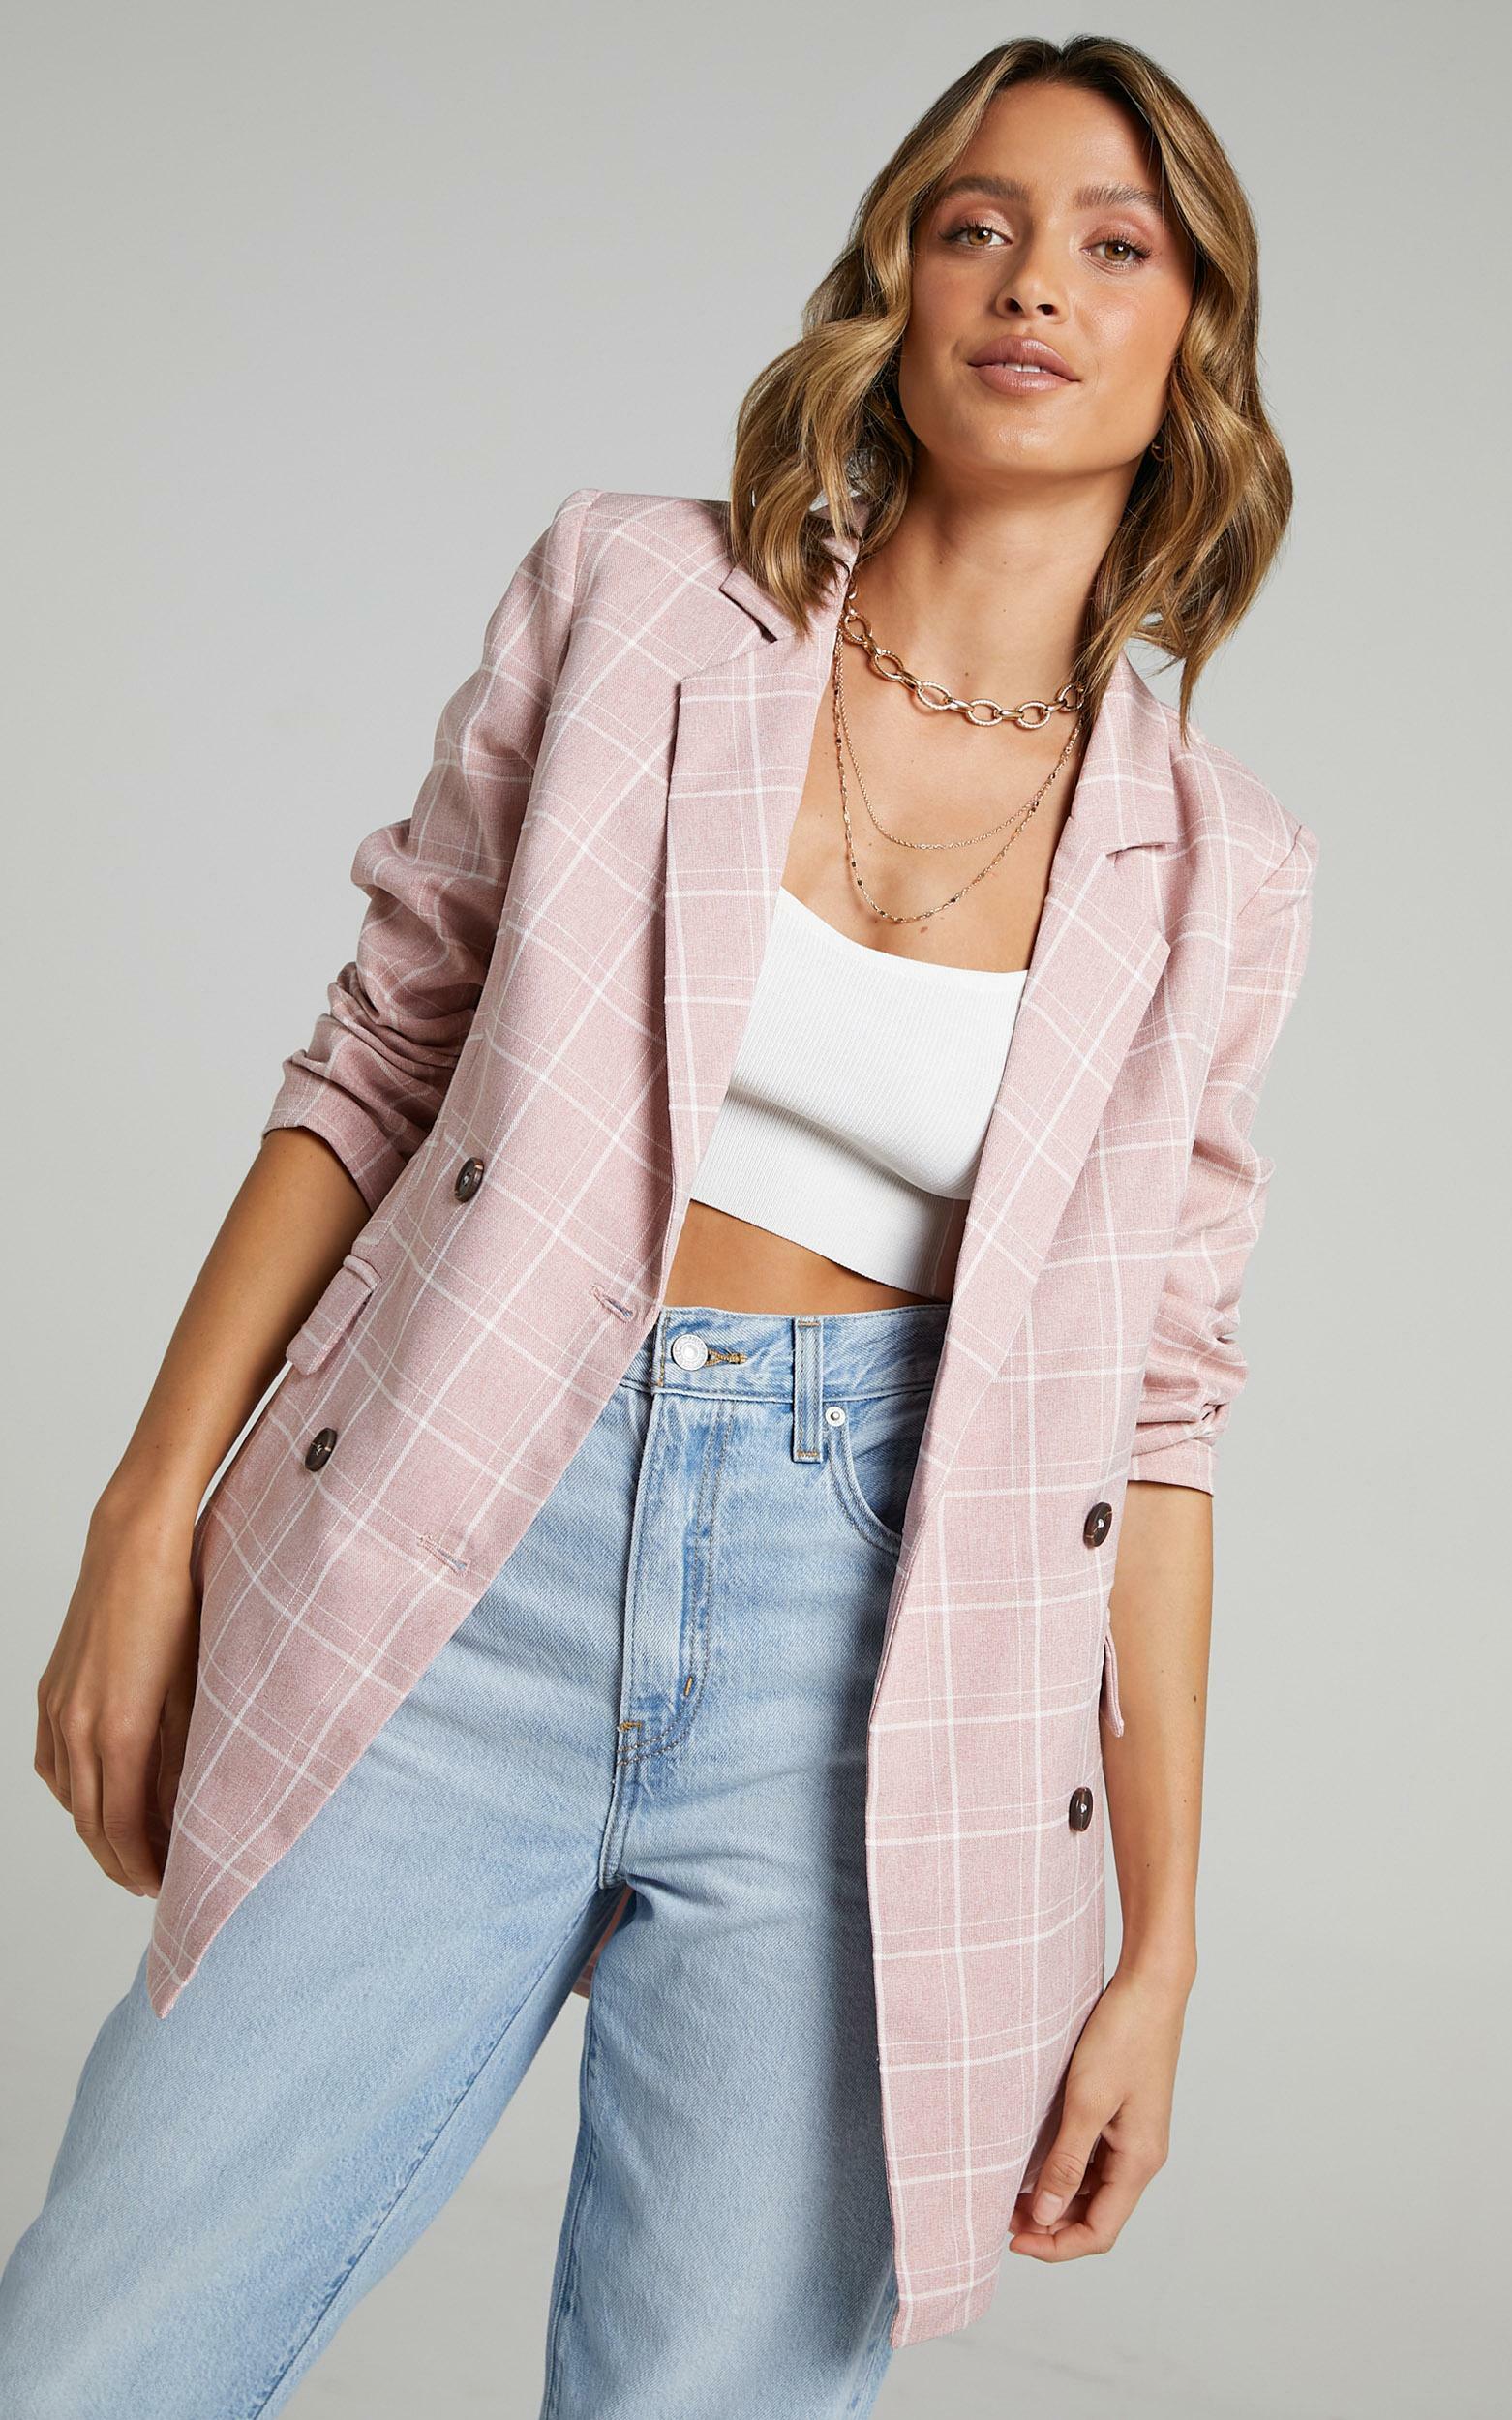 Sort It Out Blazer in Blush Check - 20, PNK3, hi-res image number null